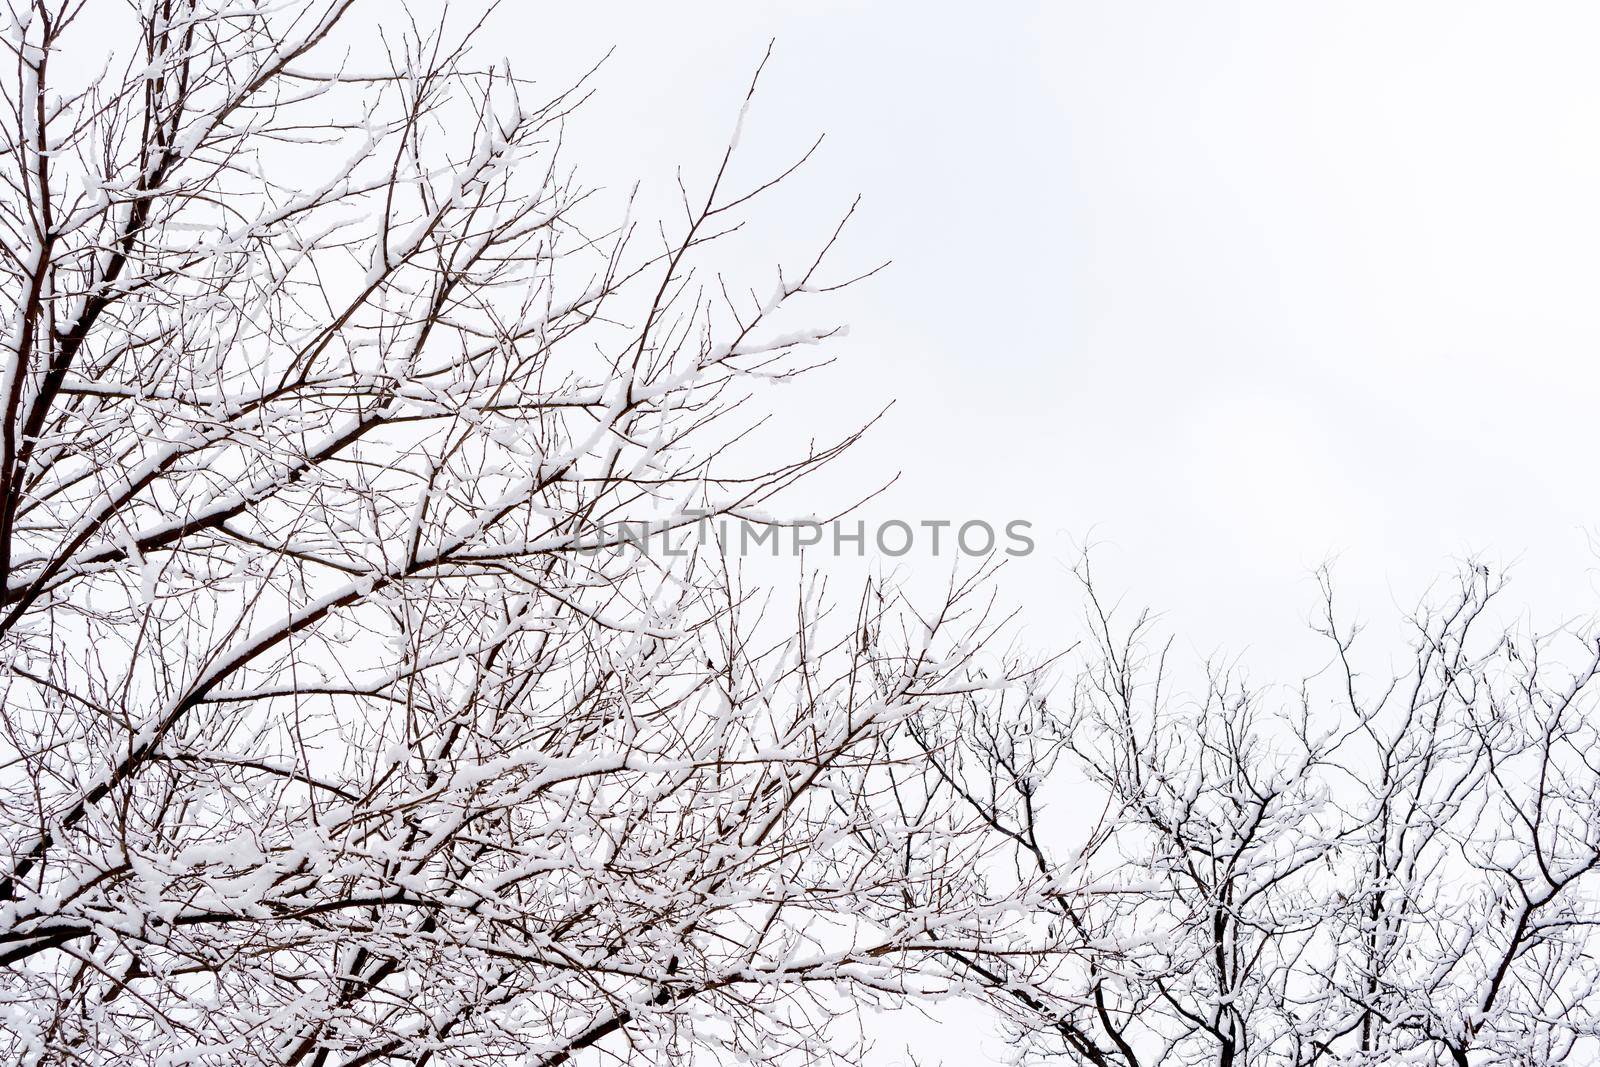 Detail of snowy tree branches with cloudy sky in the background on a cold wintry day